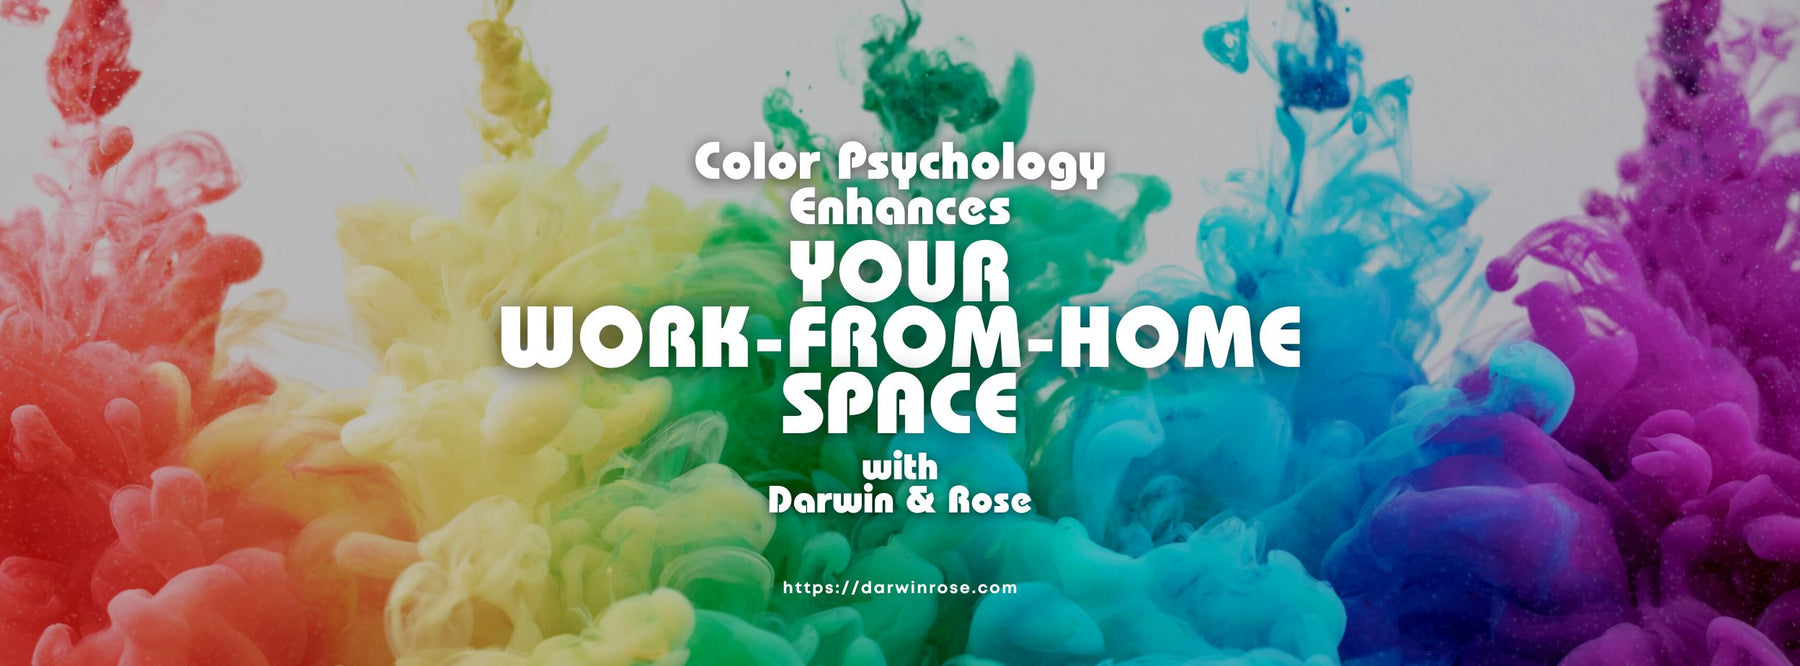 Color Psychology Enhances Your Work-From-Home Space with Darwin & Rose Home Decor!